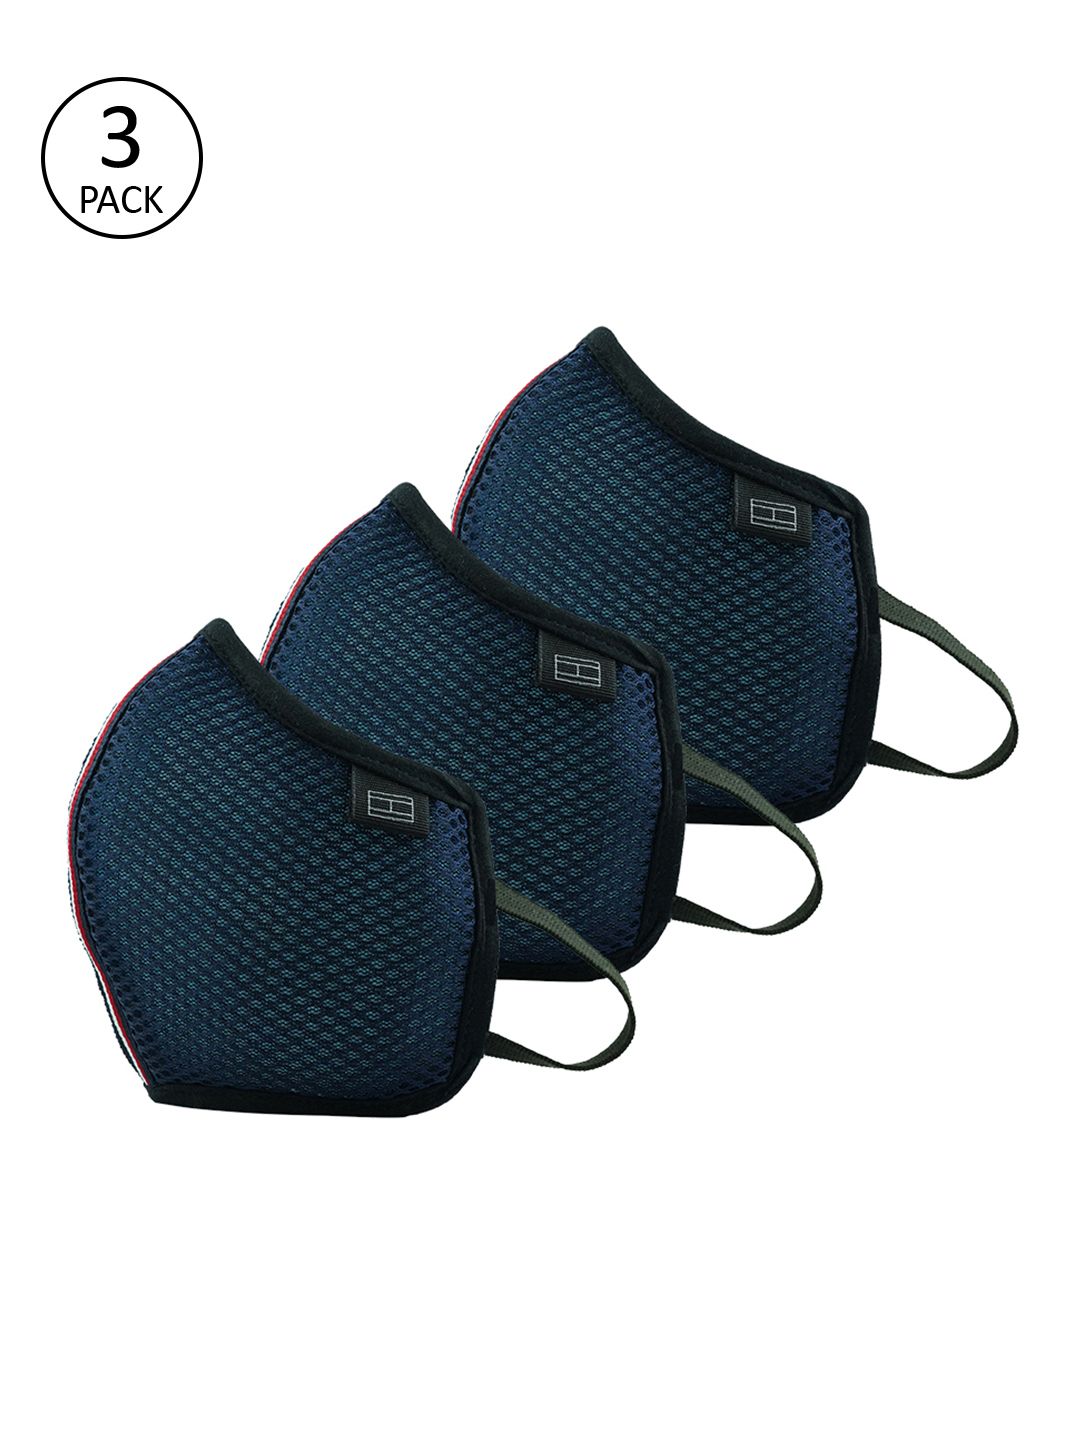 Tommy Hilfiger Adults Navy Blue Pack of 3 Reusable 4 Layer Protective Outdoor Masks Price in India